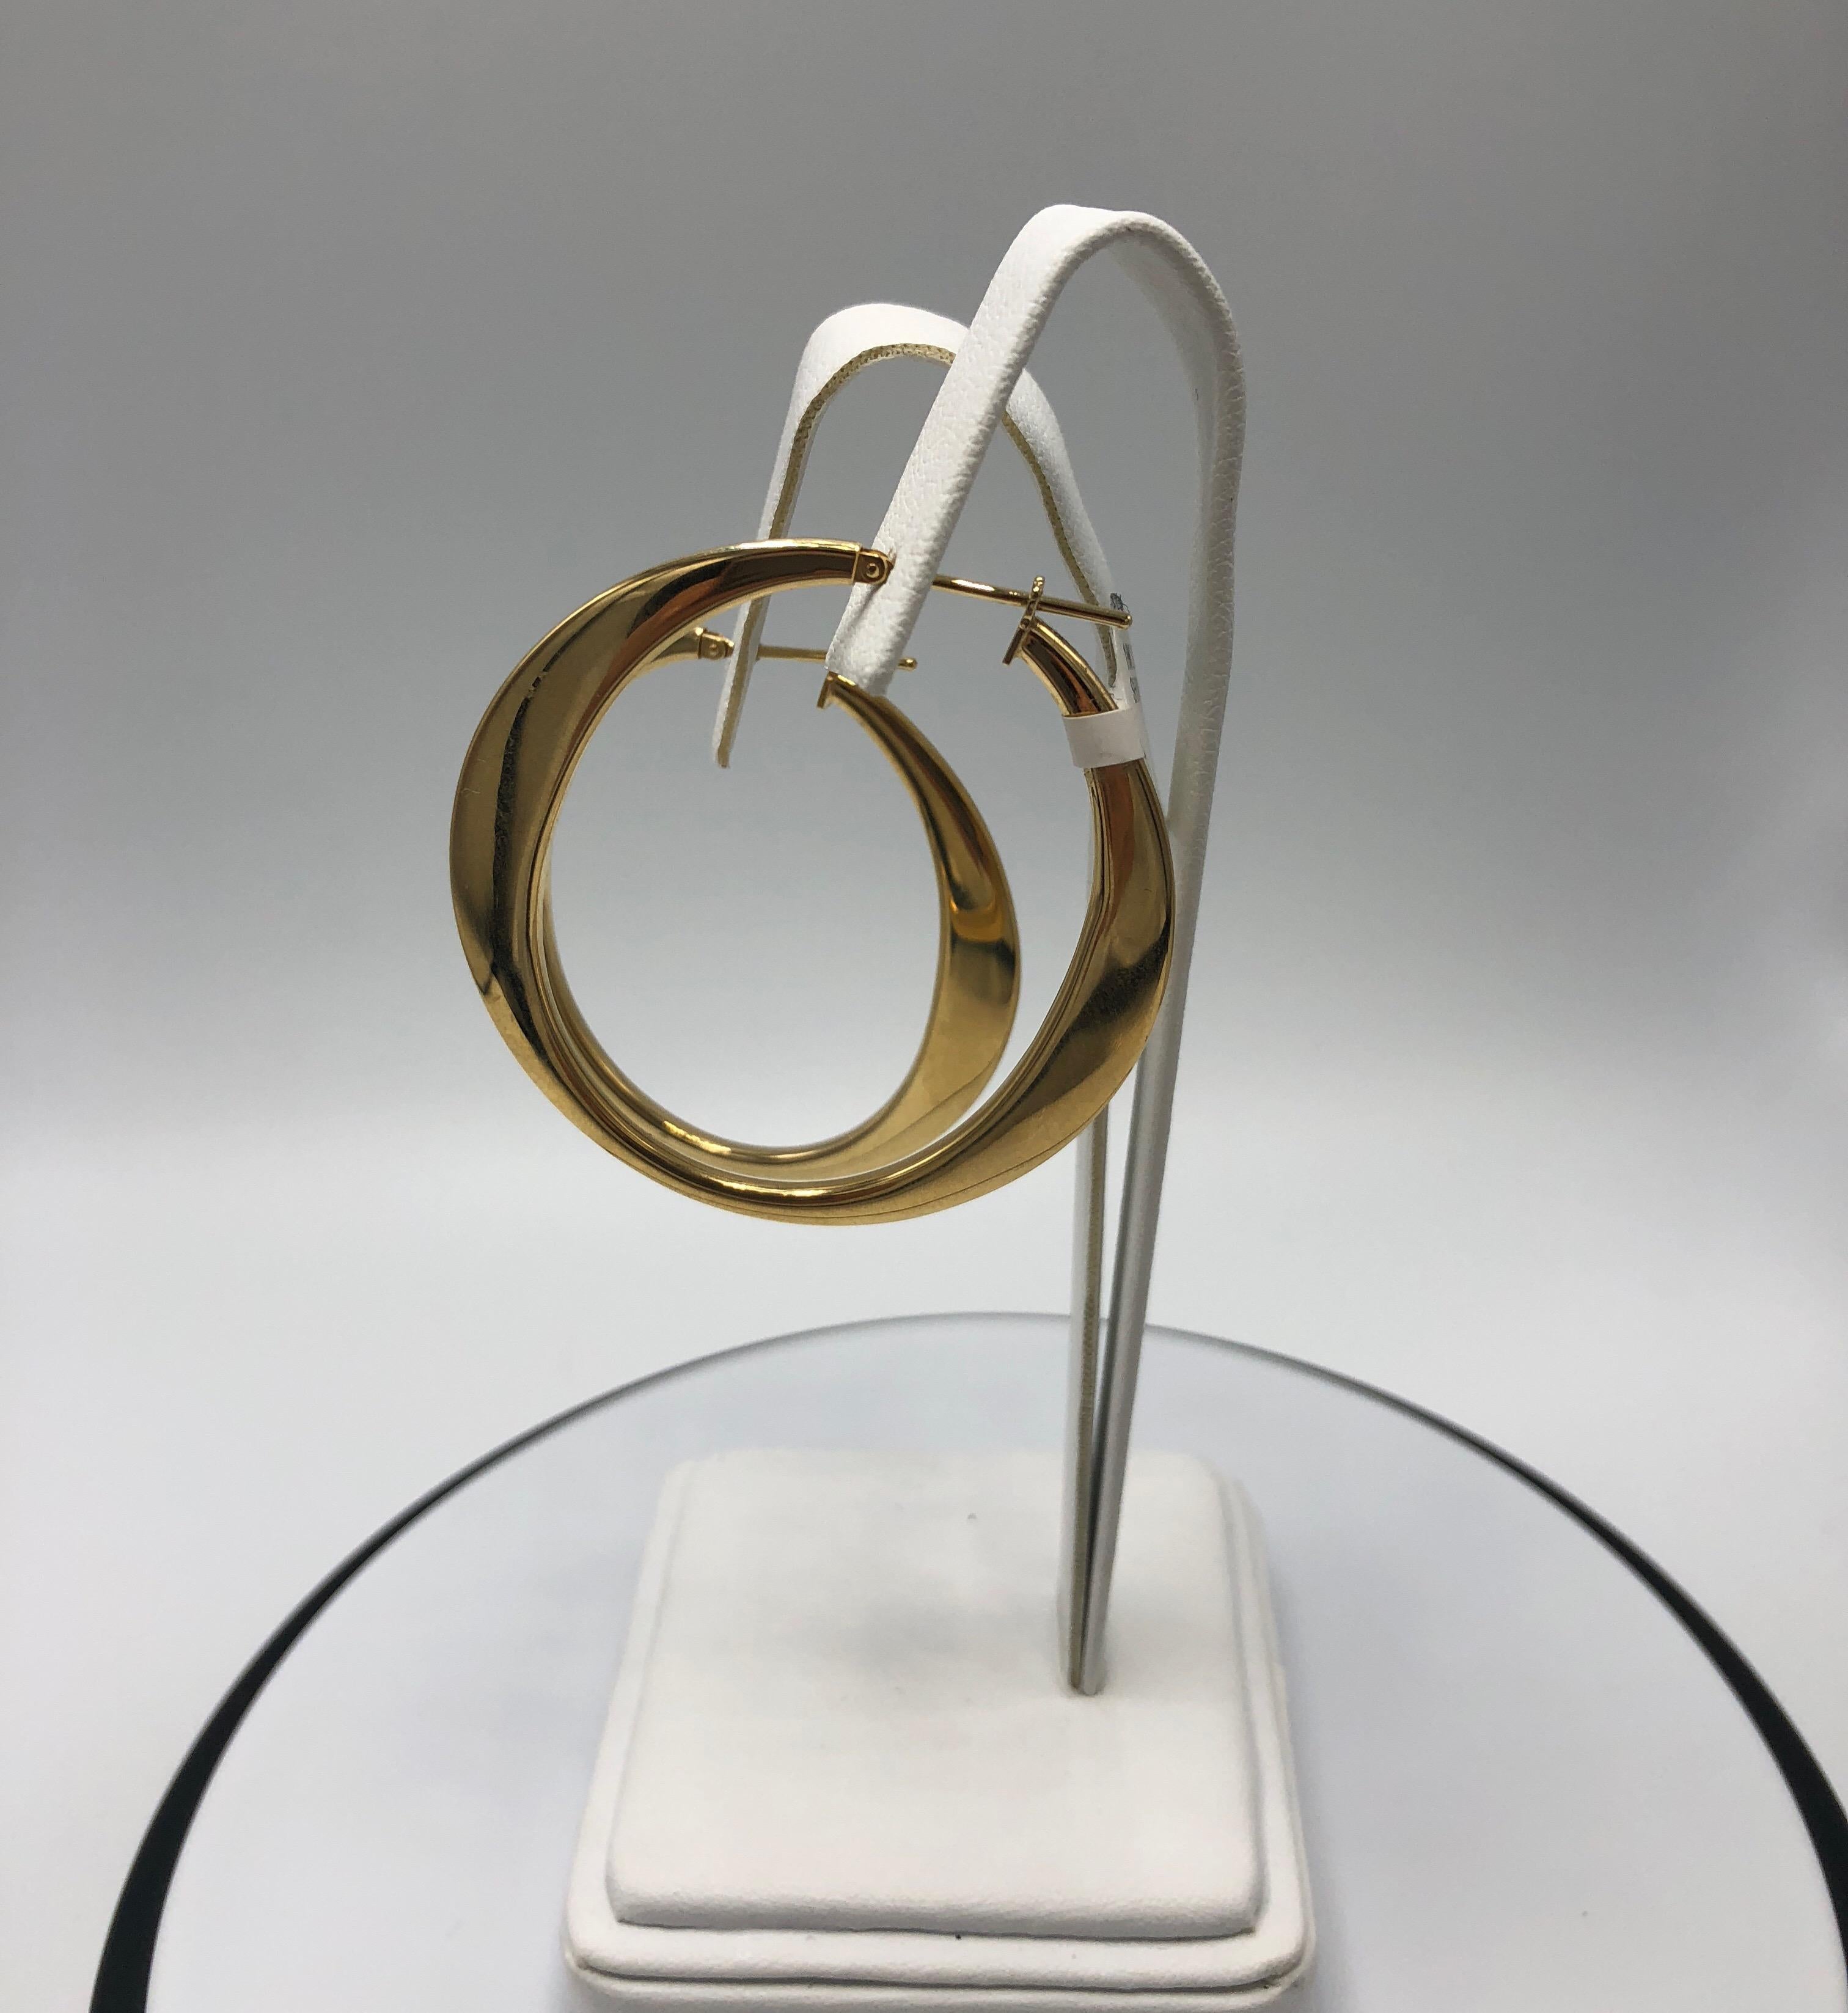 18K gold Large Flat Shiny Hoops made in Italy by Antonio Papini.  